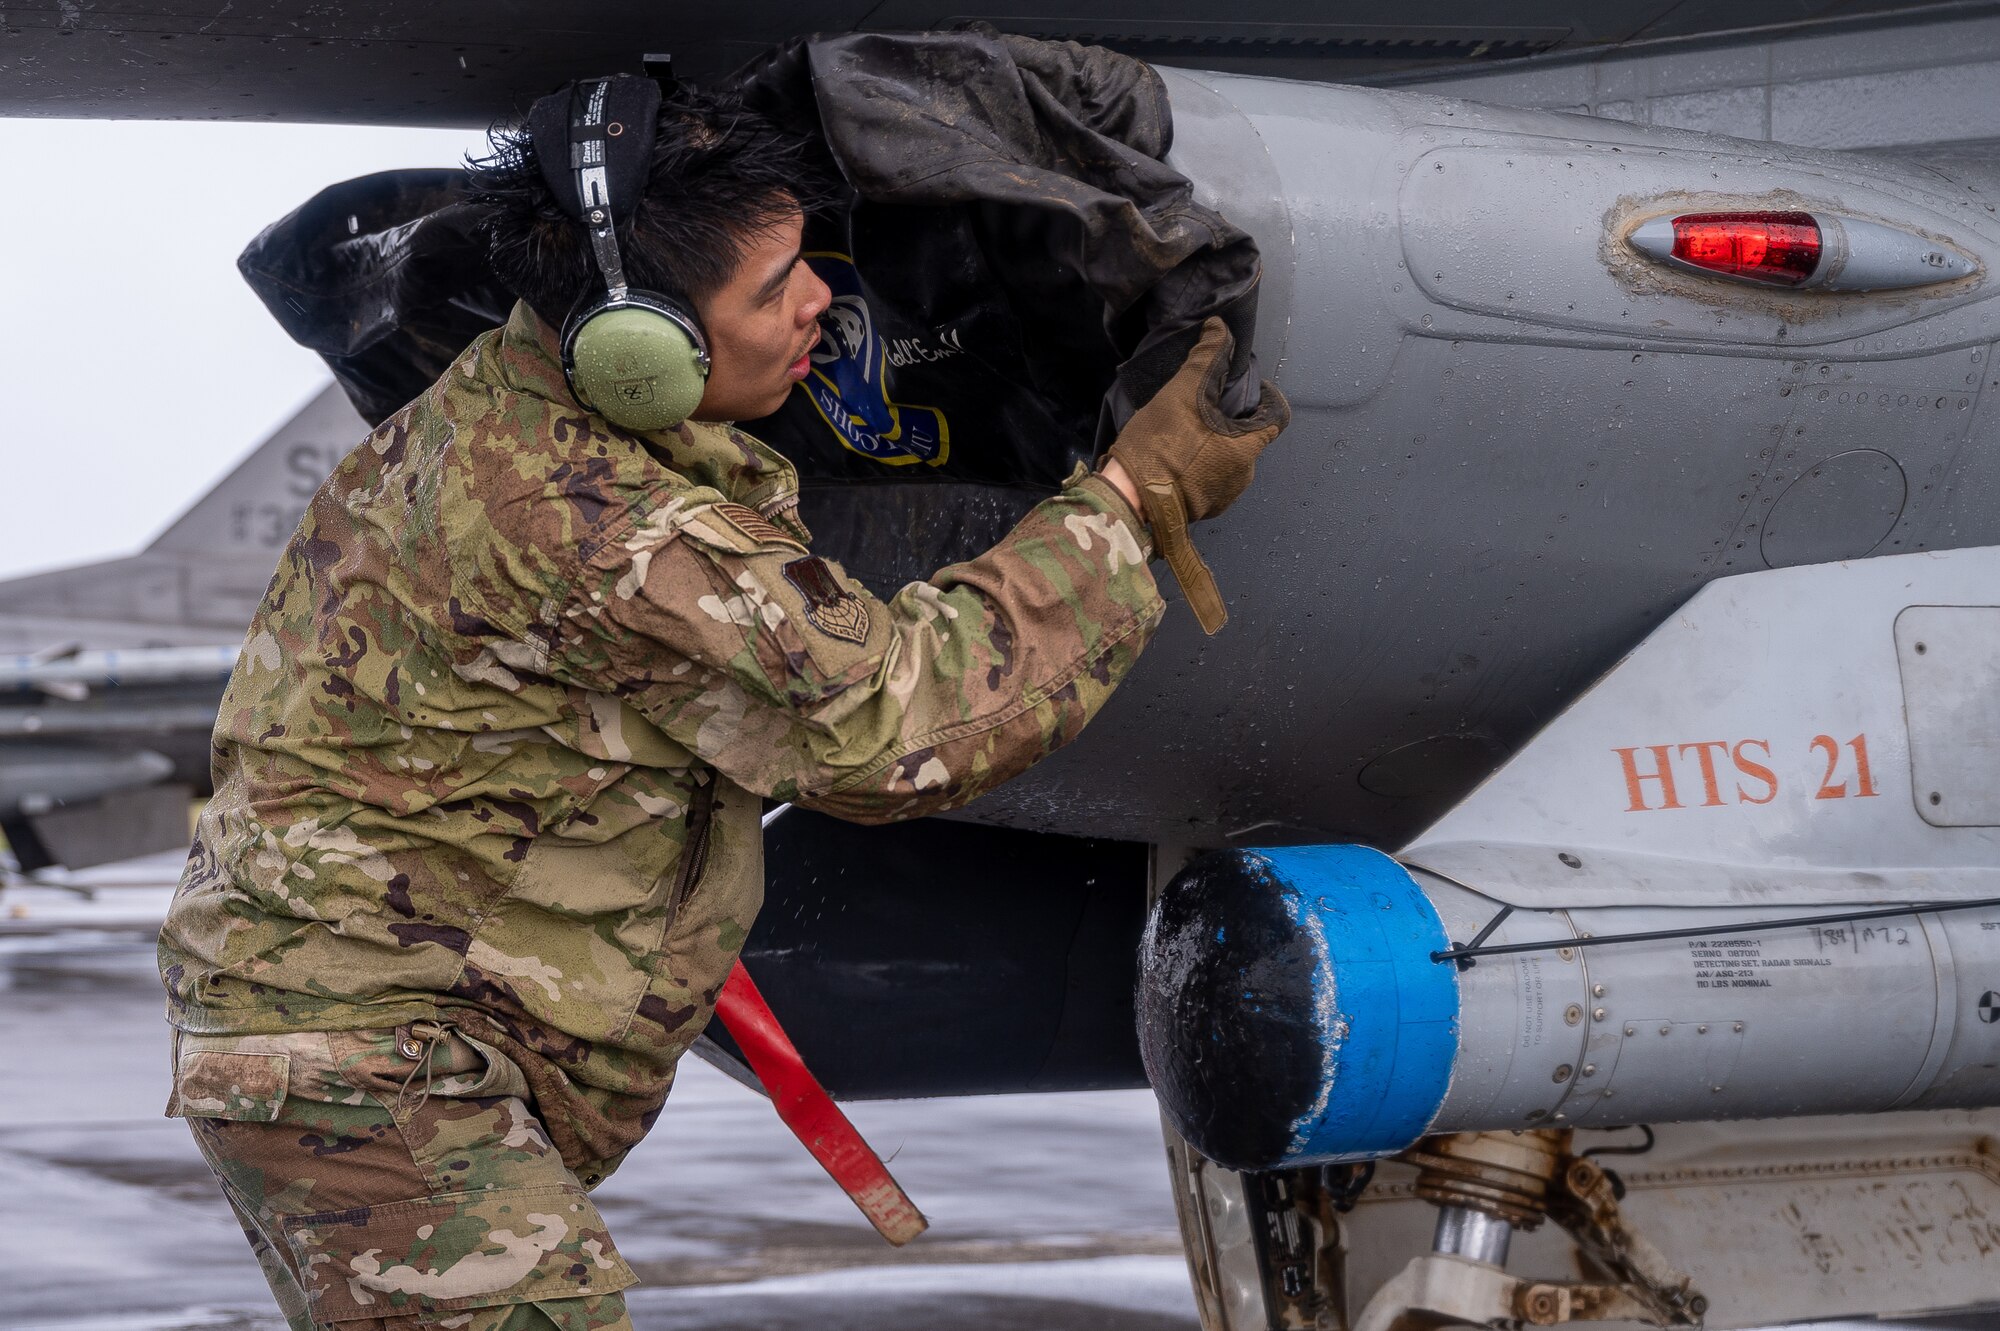 An Airman secures an intake cover during the recovery of an F-16 aircraft.